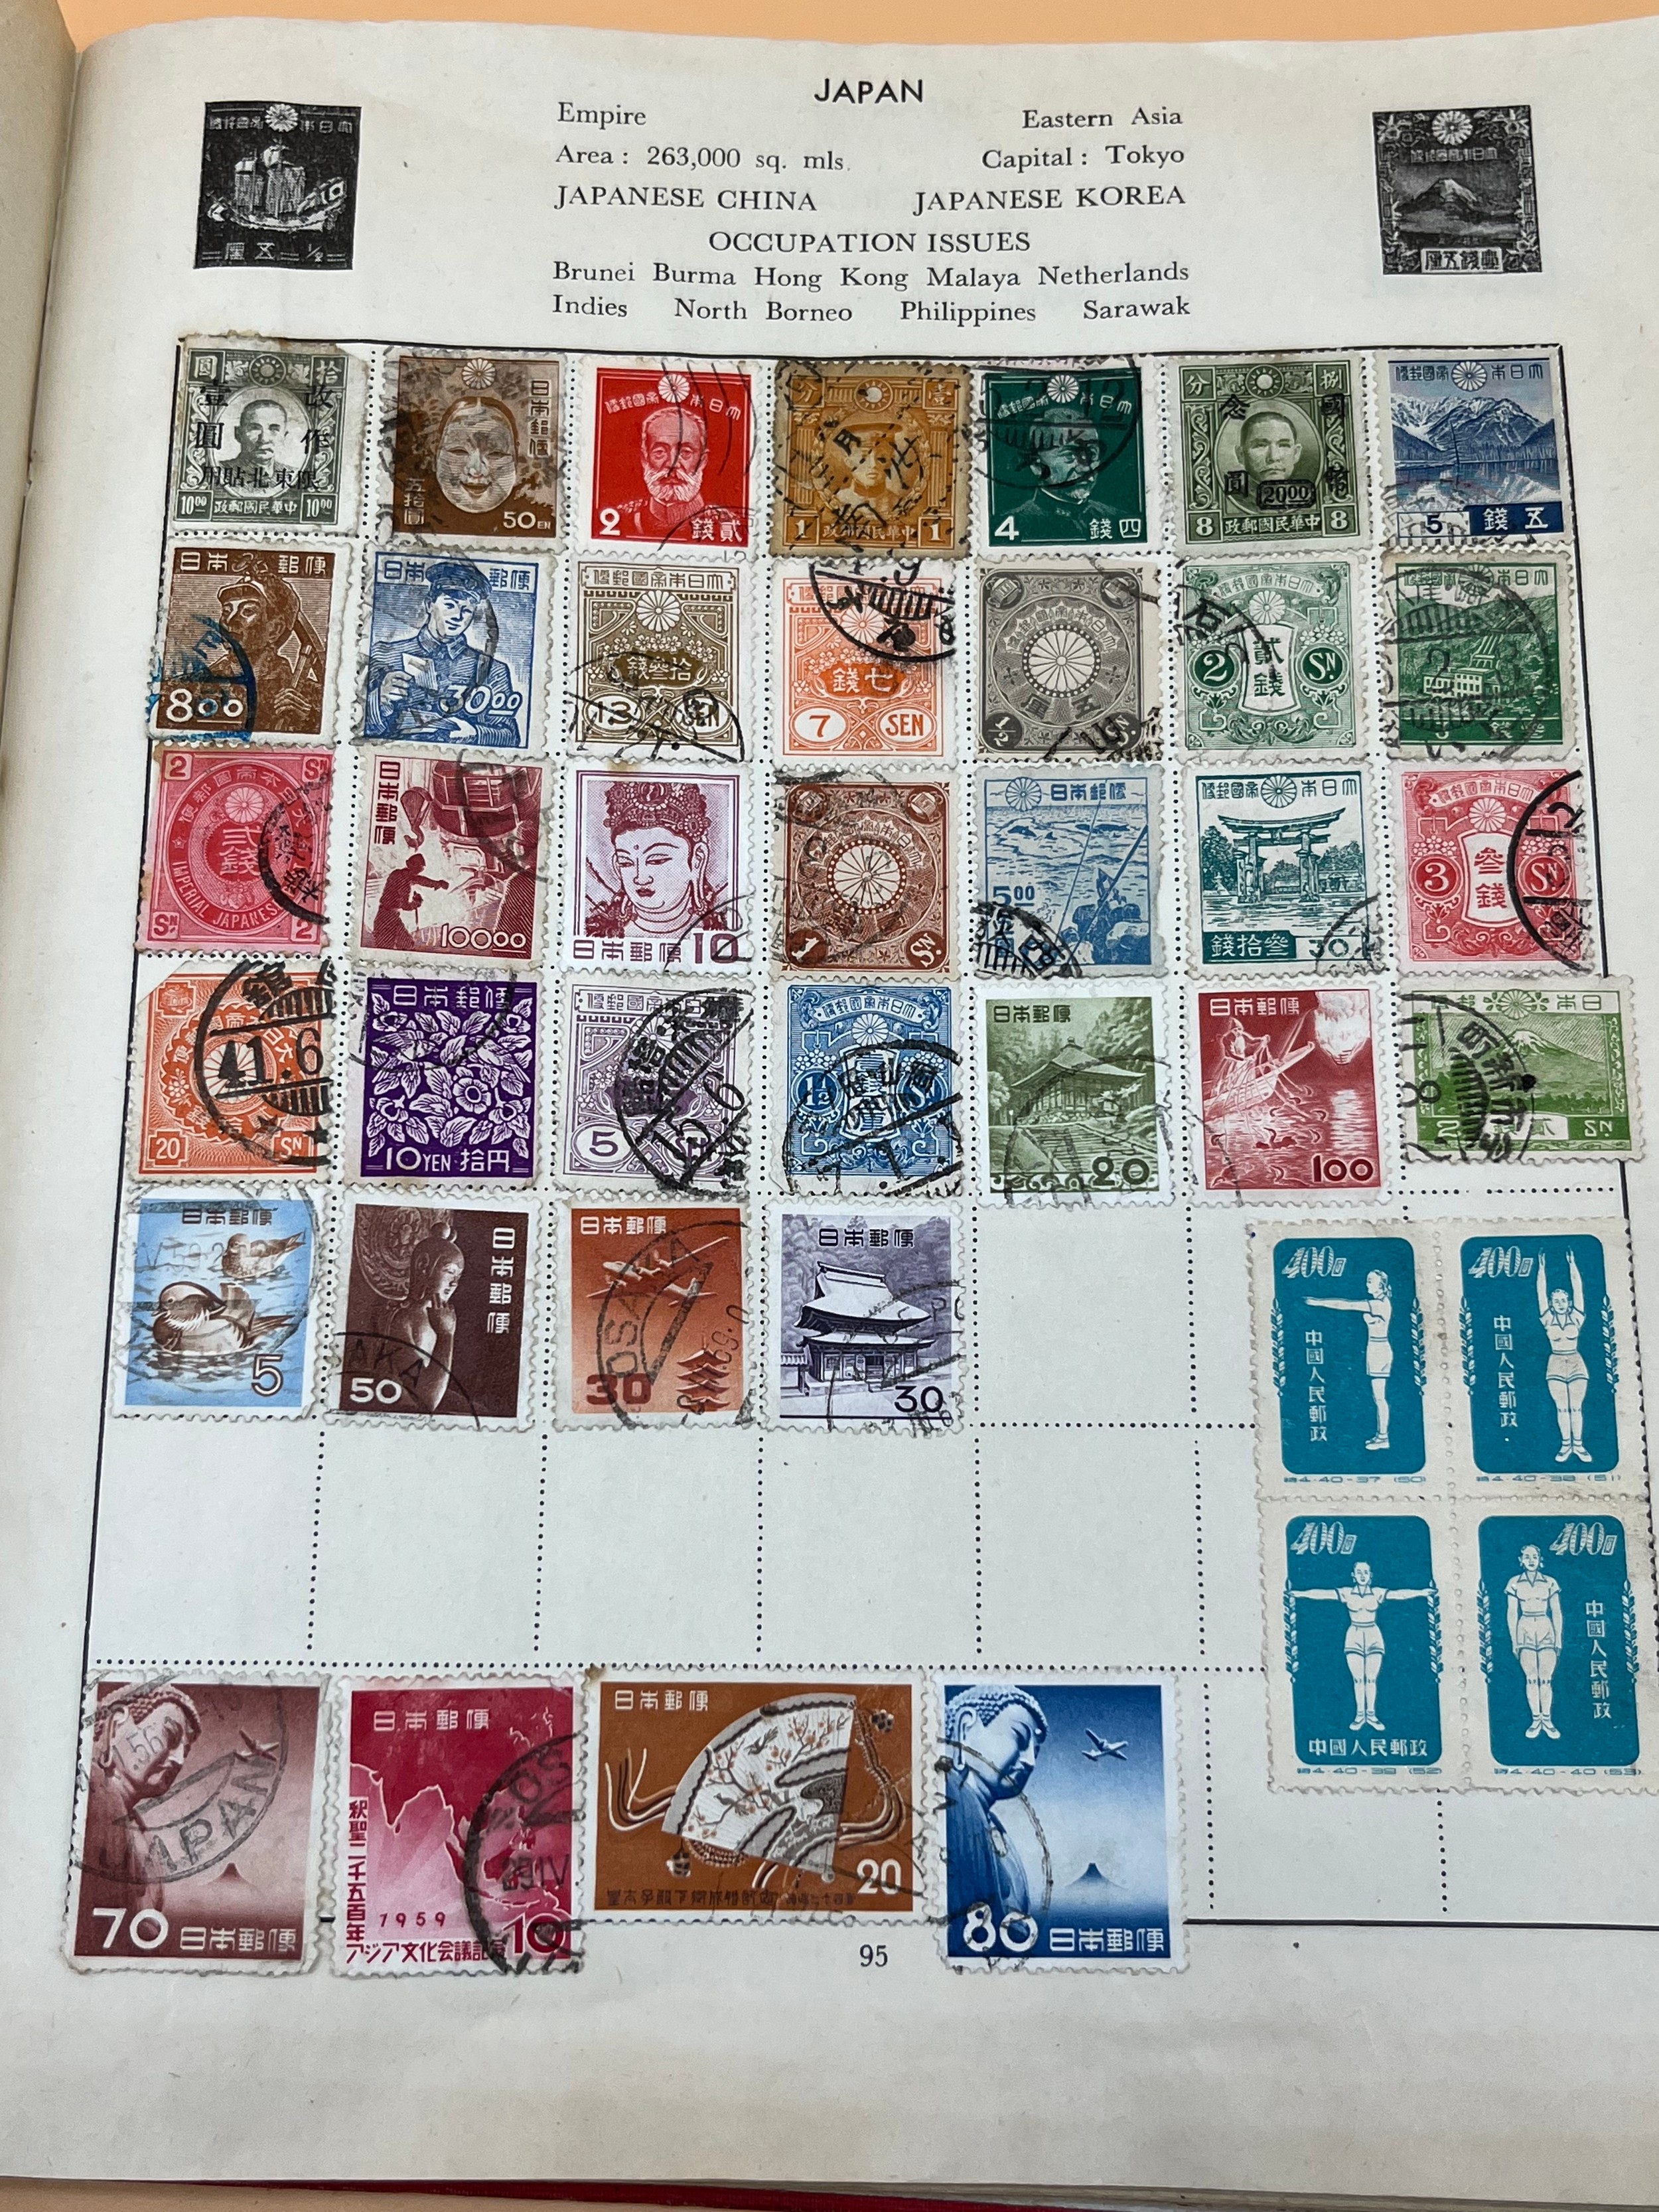 Vintage stamp album containing a collection of world stamps - Image 14 of 22